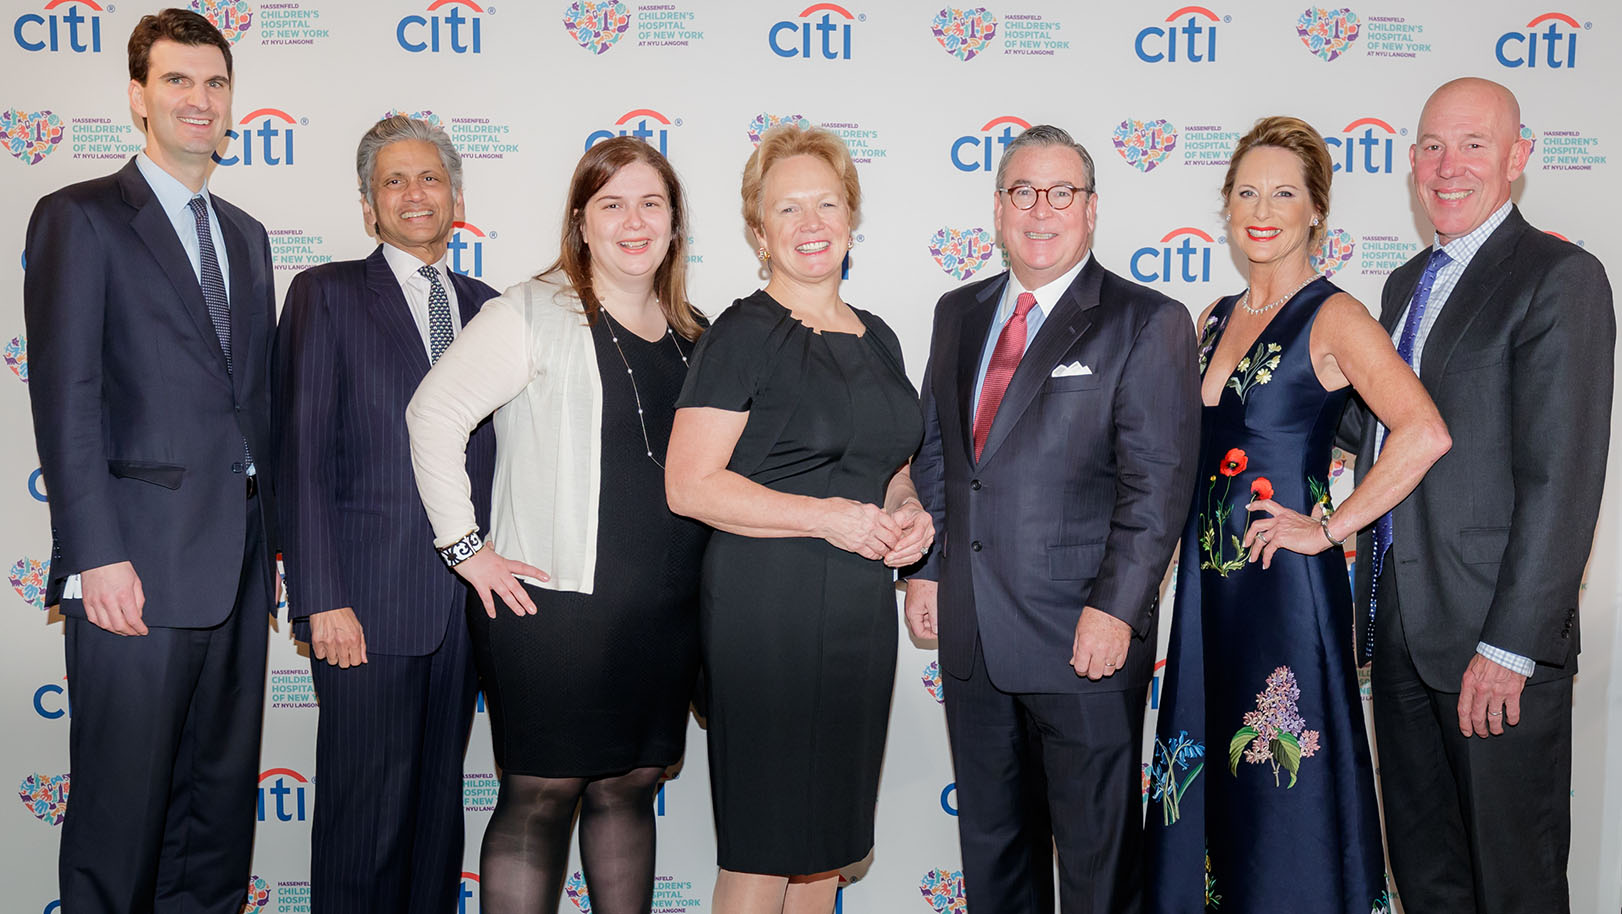 Citi employees show strong support at our Adults in Toyland Casino Night event.